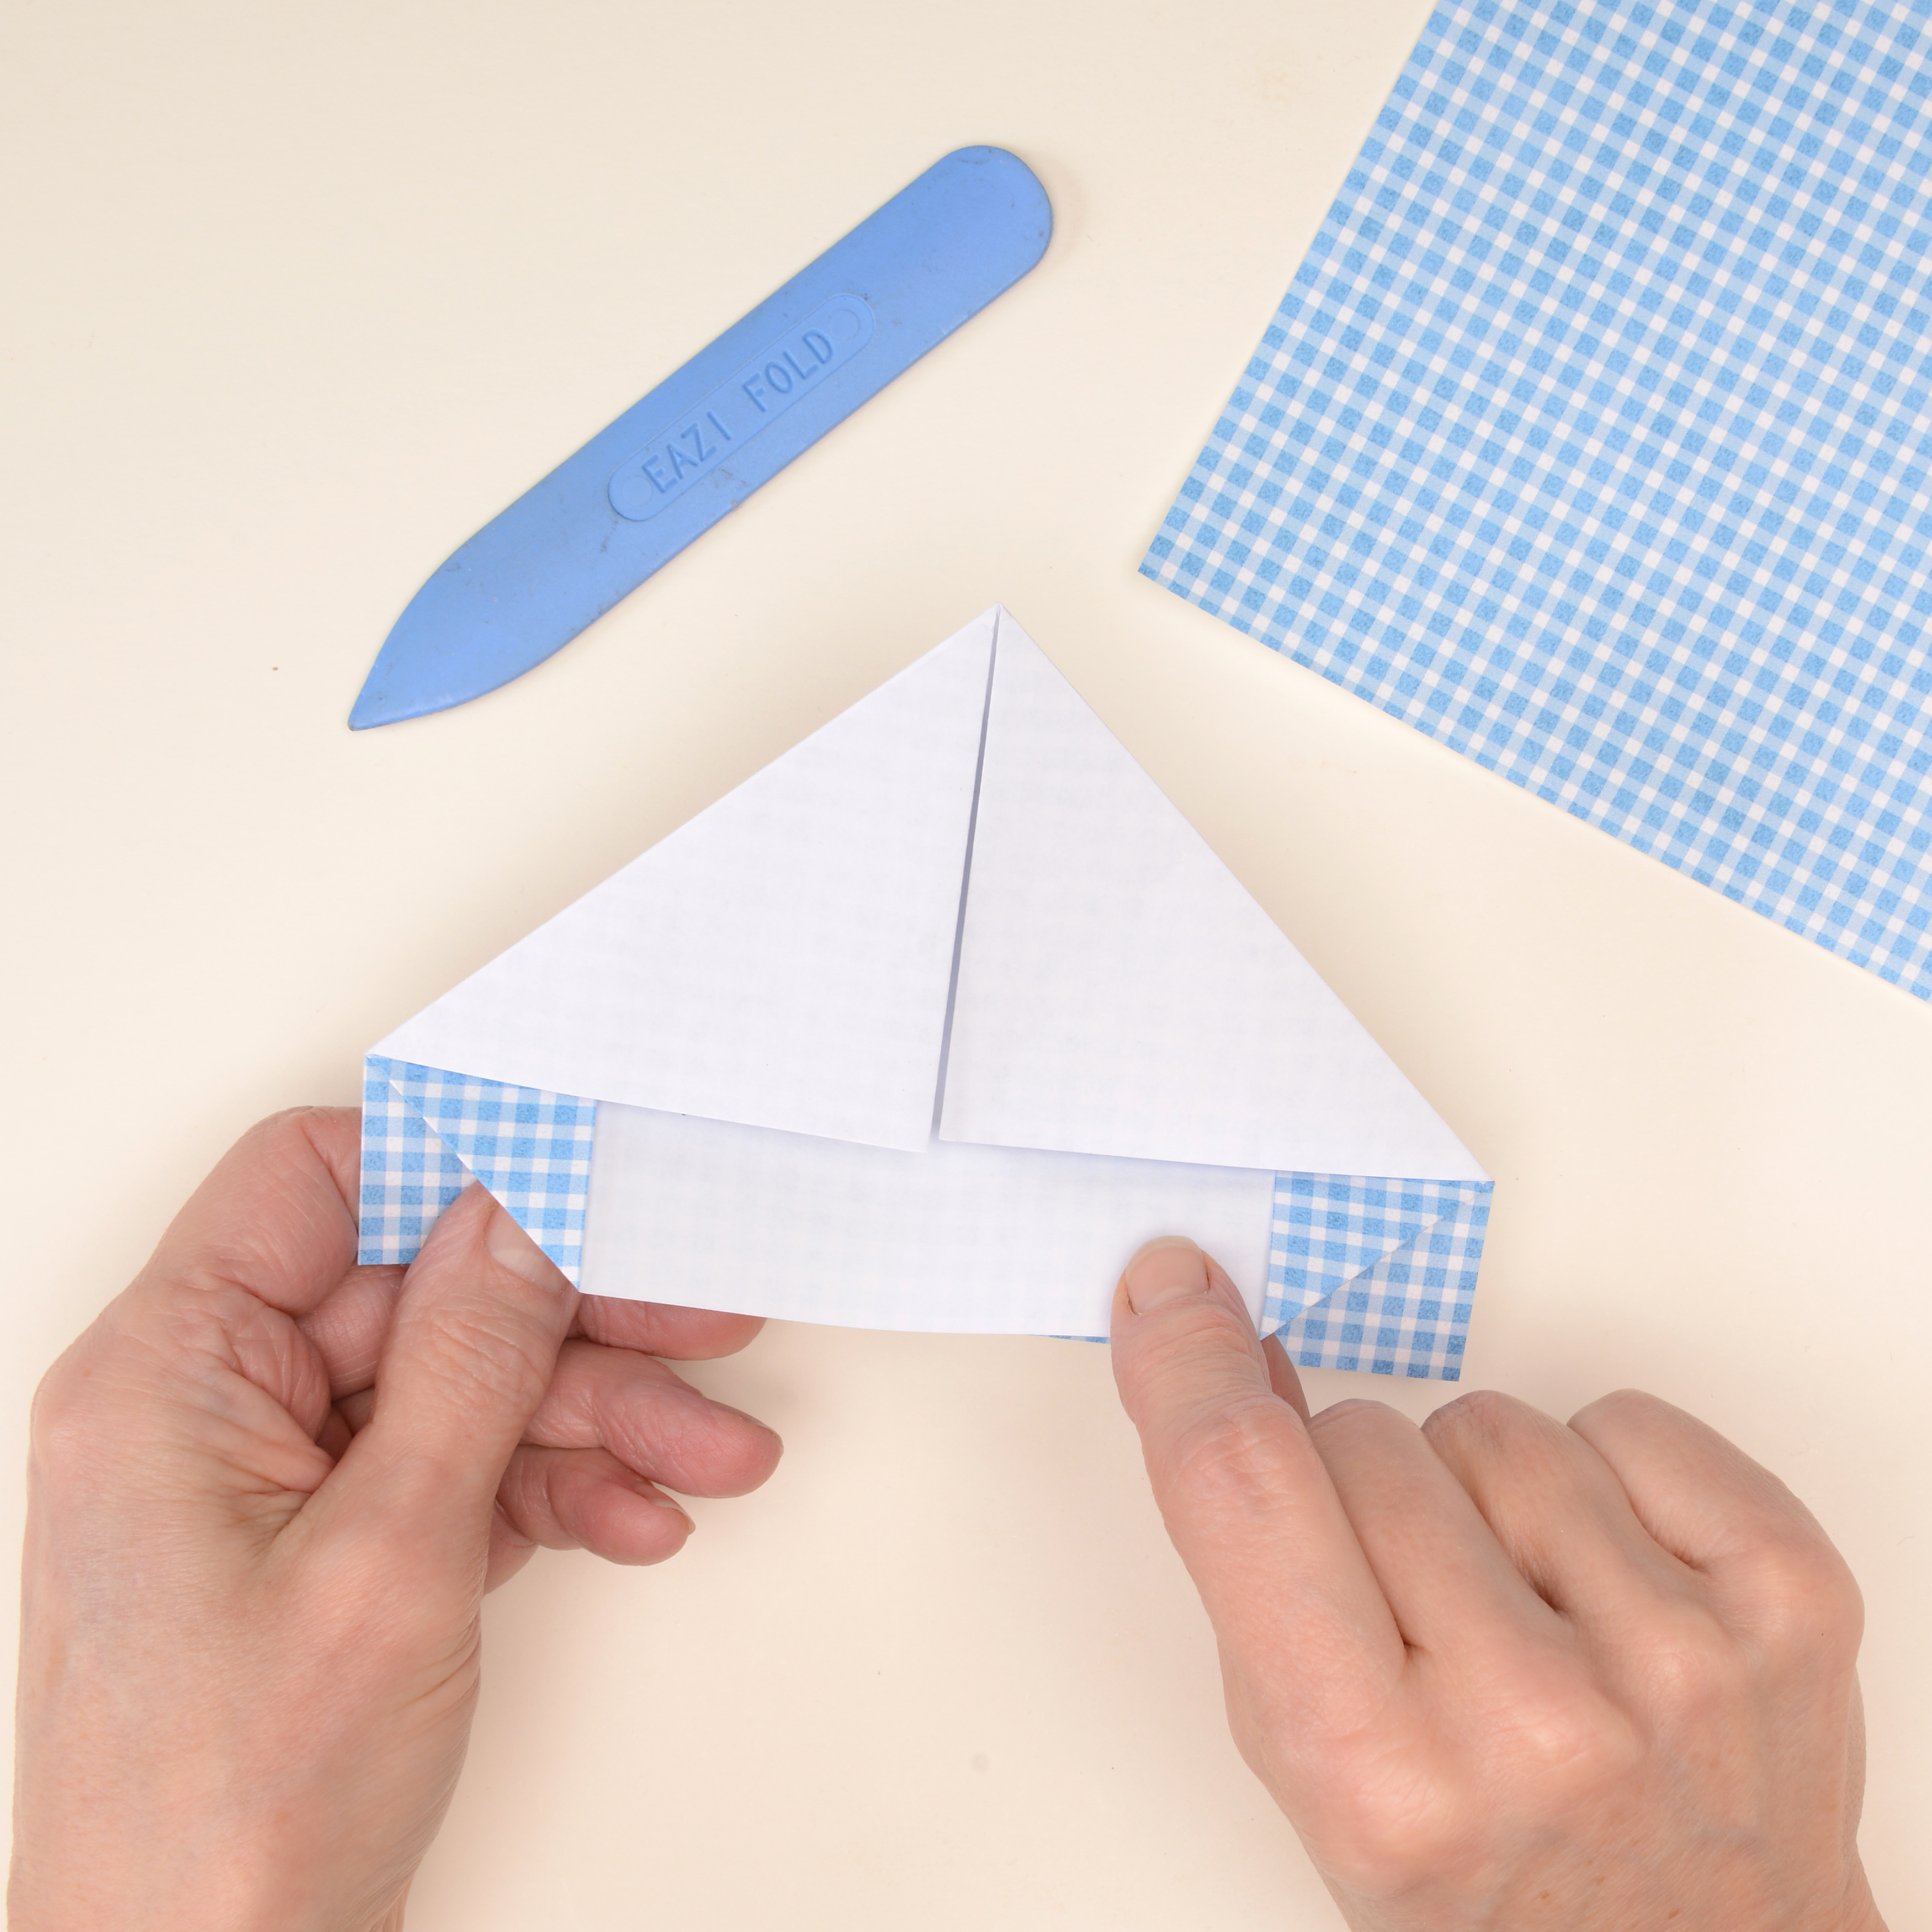 How to make an origami sail boat mobile 2